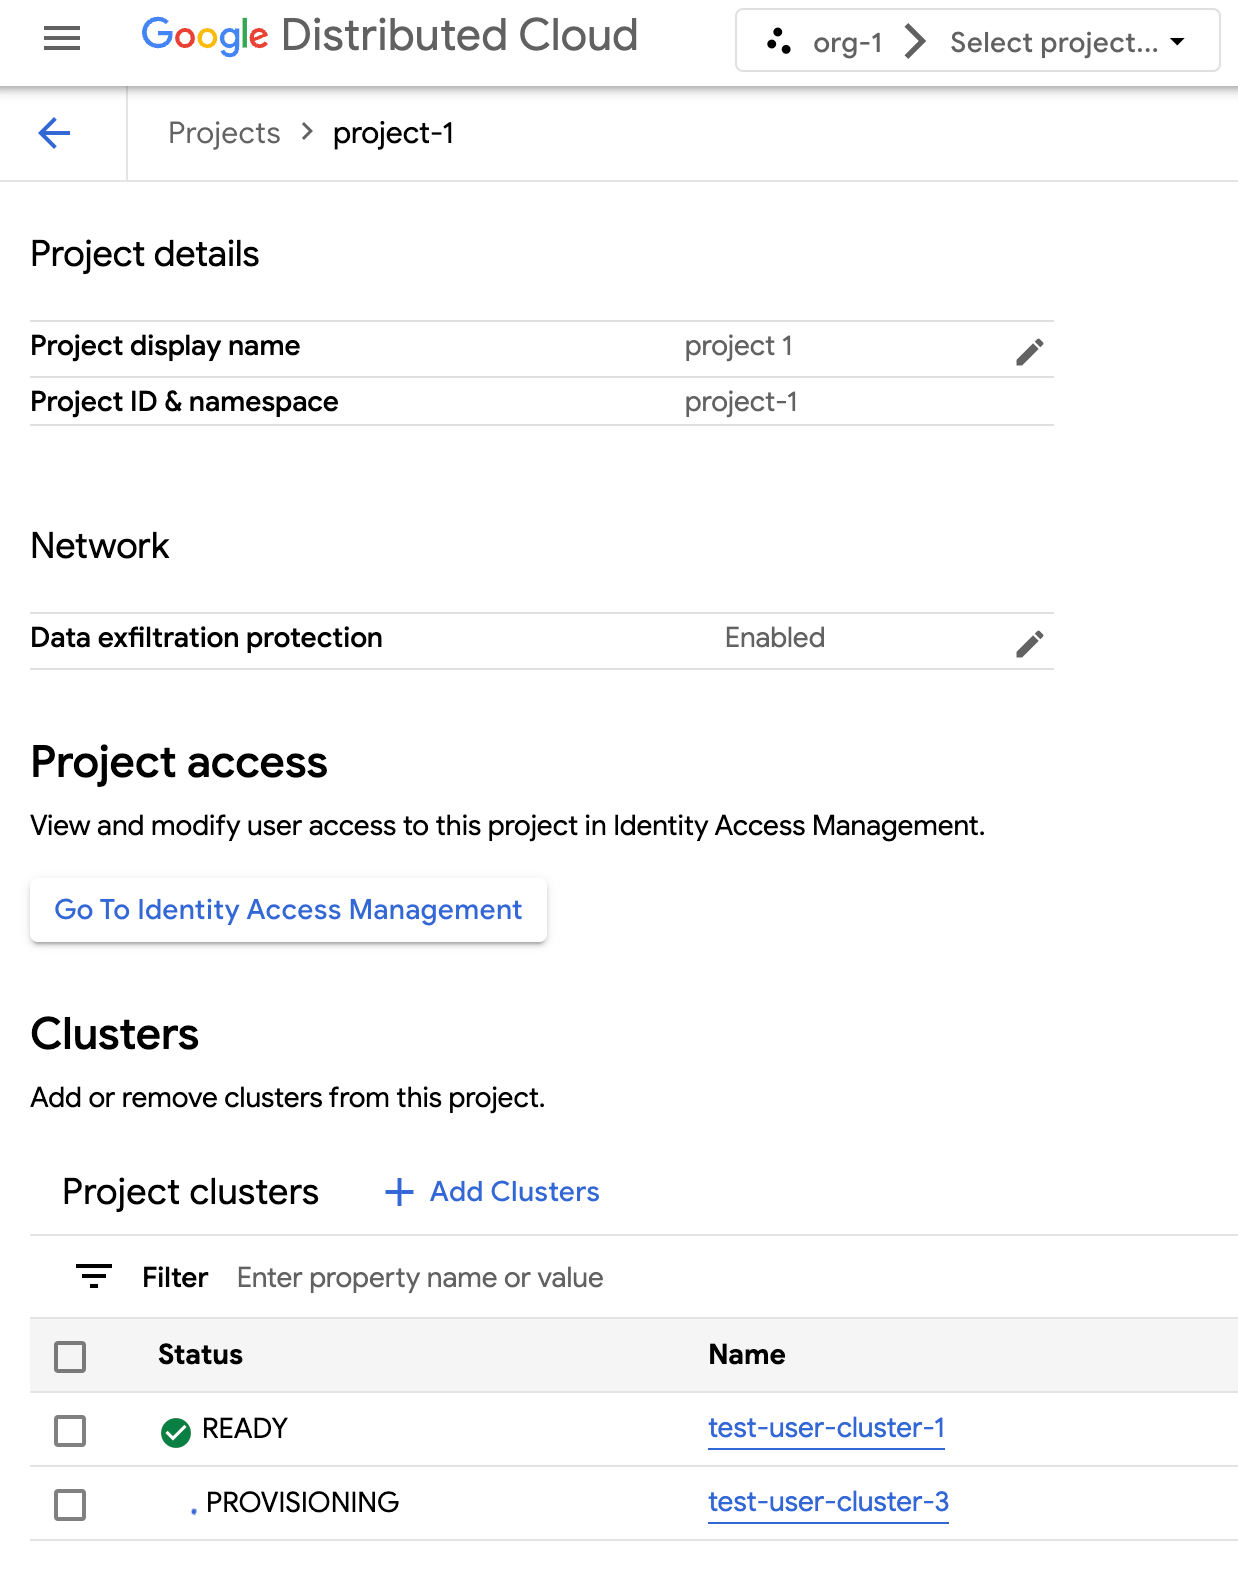 View project details such as project name, attached clusters, and network settings.